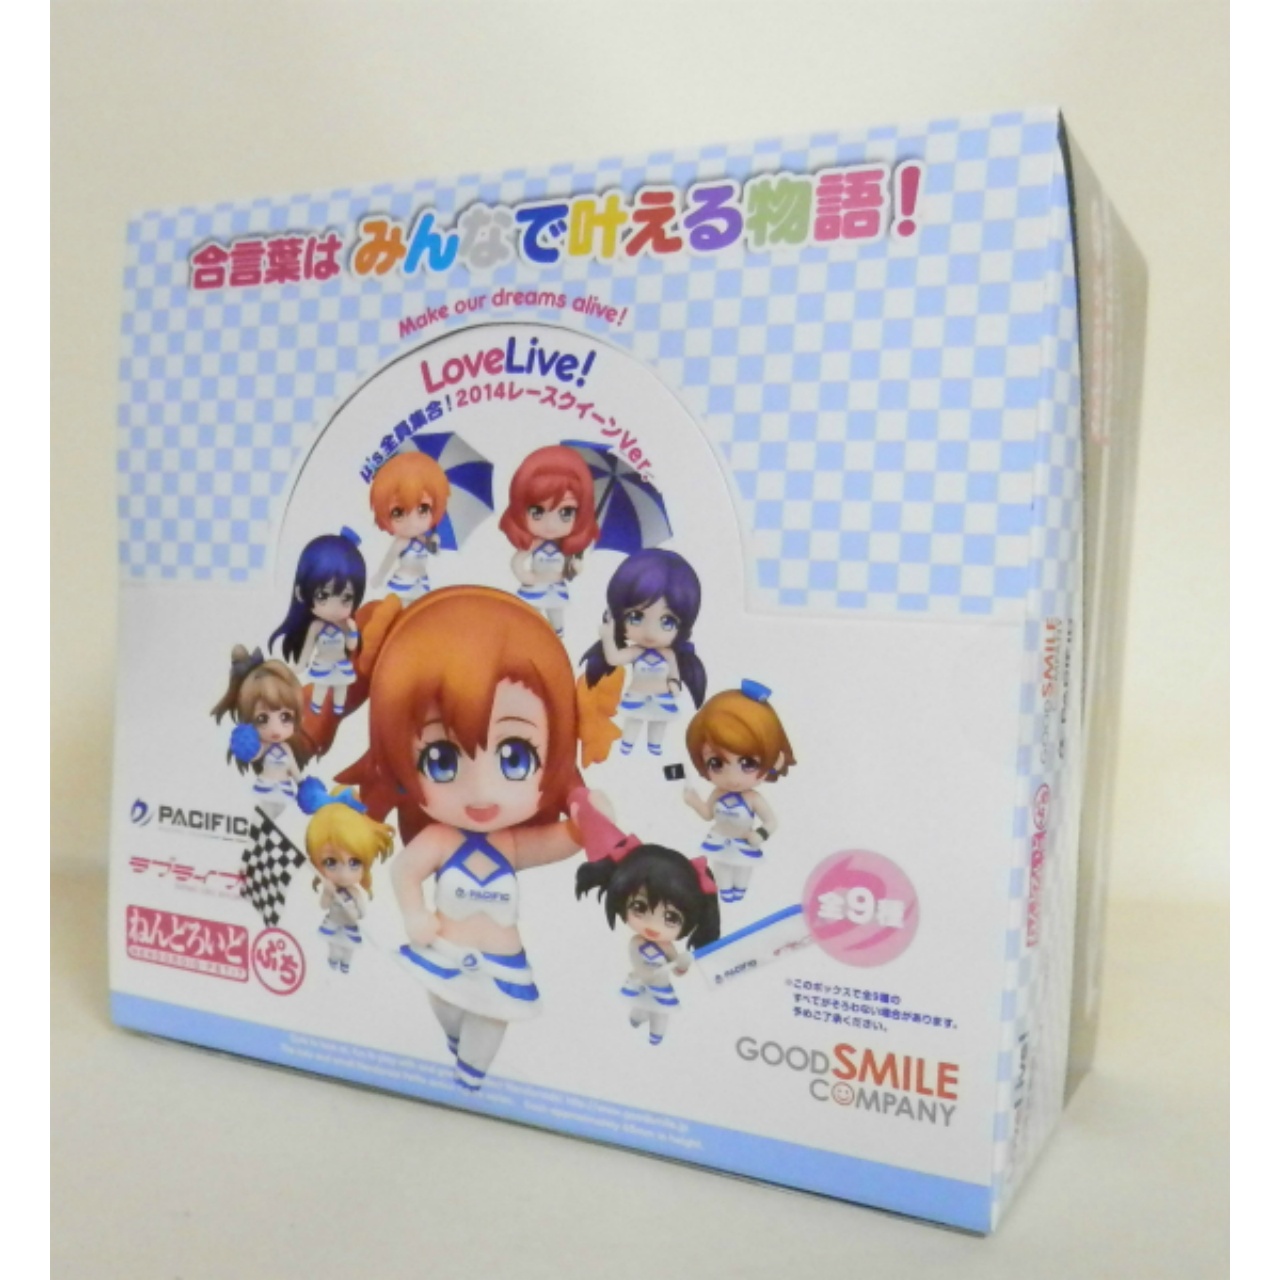 Nendoroid Petit Love Live! That's Our Miracle ver. BOX